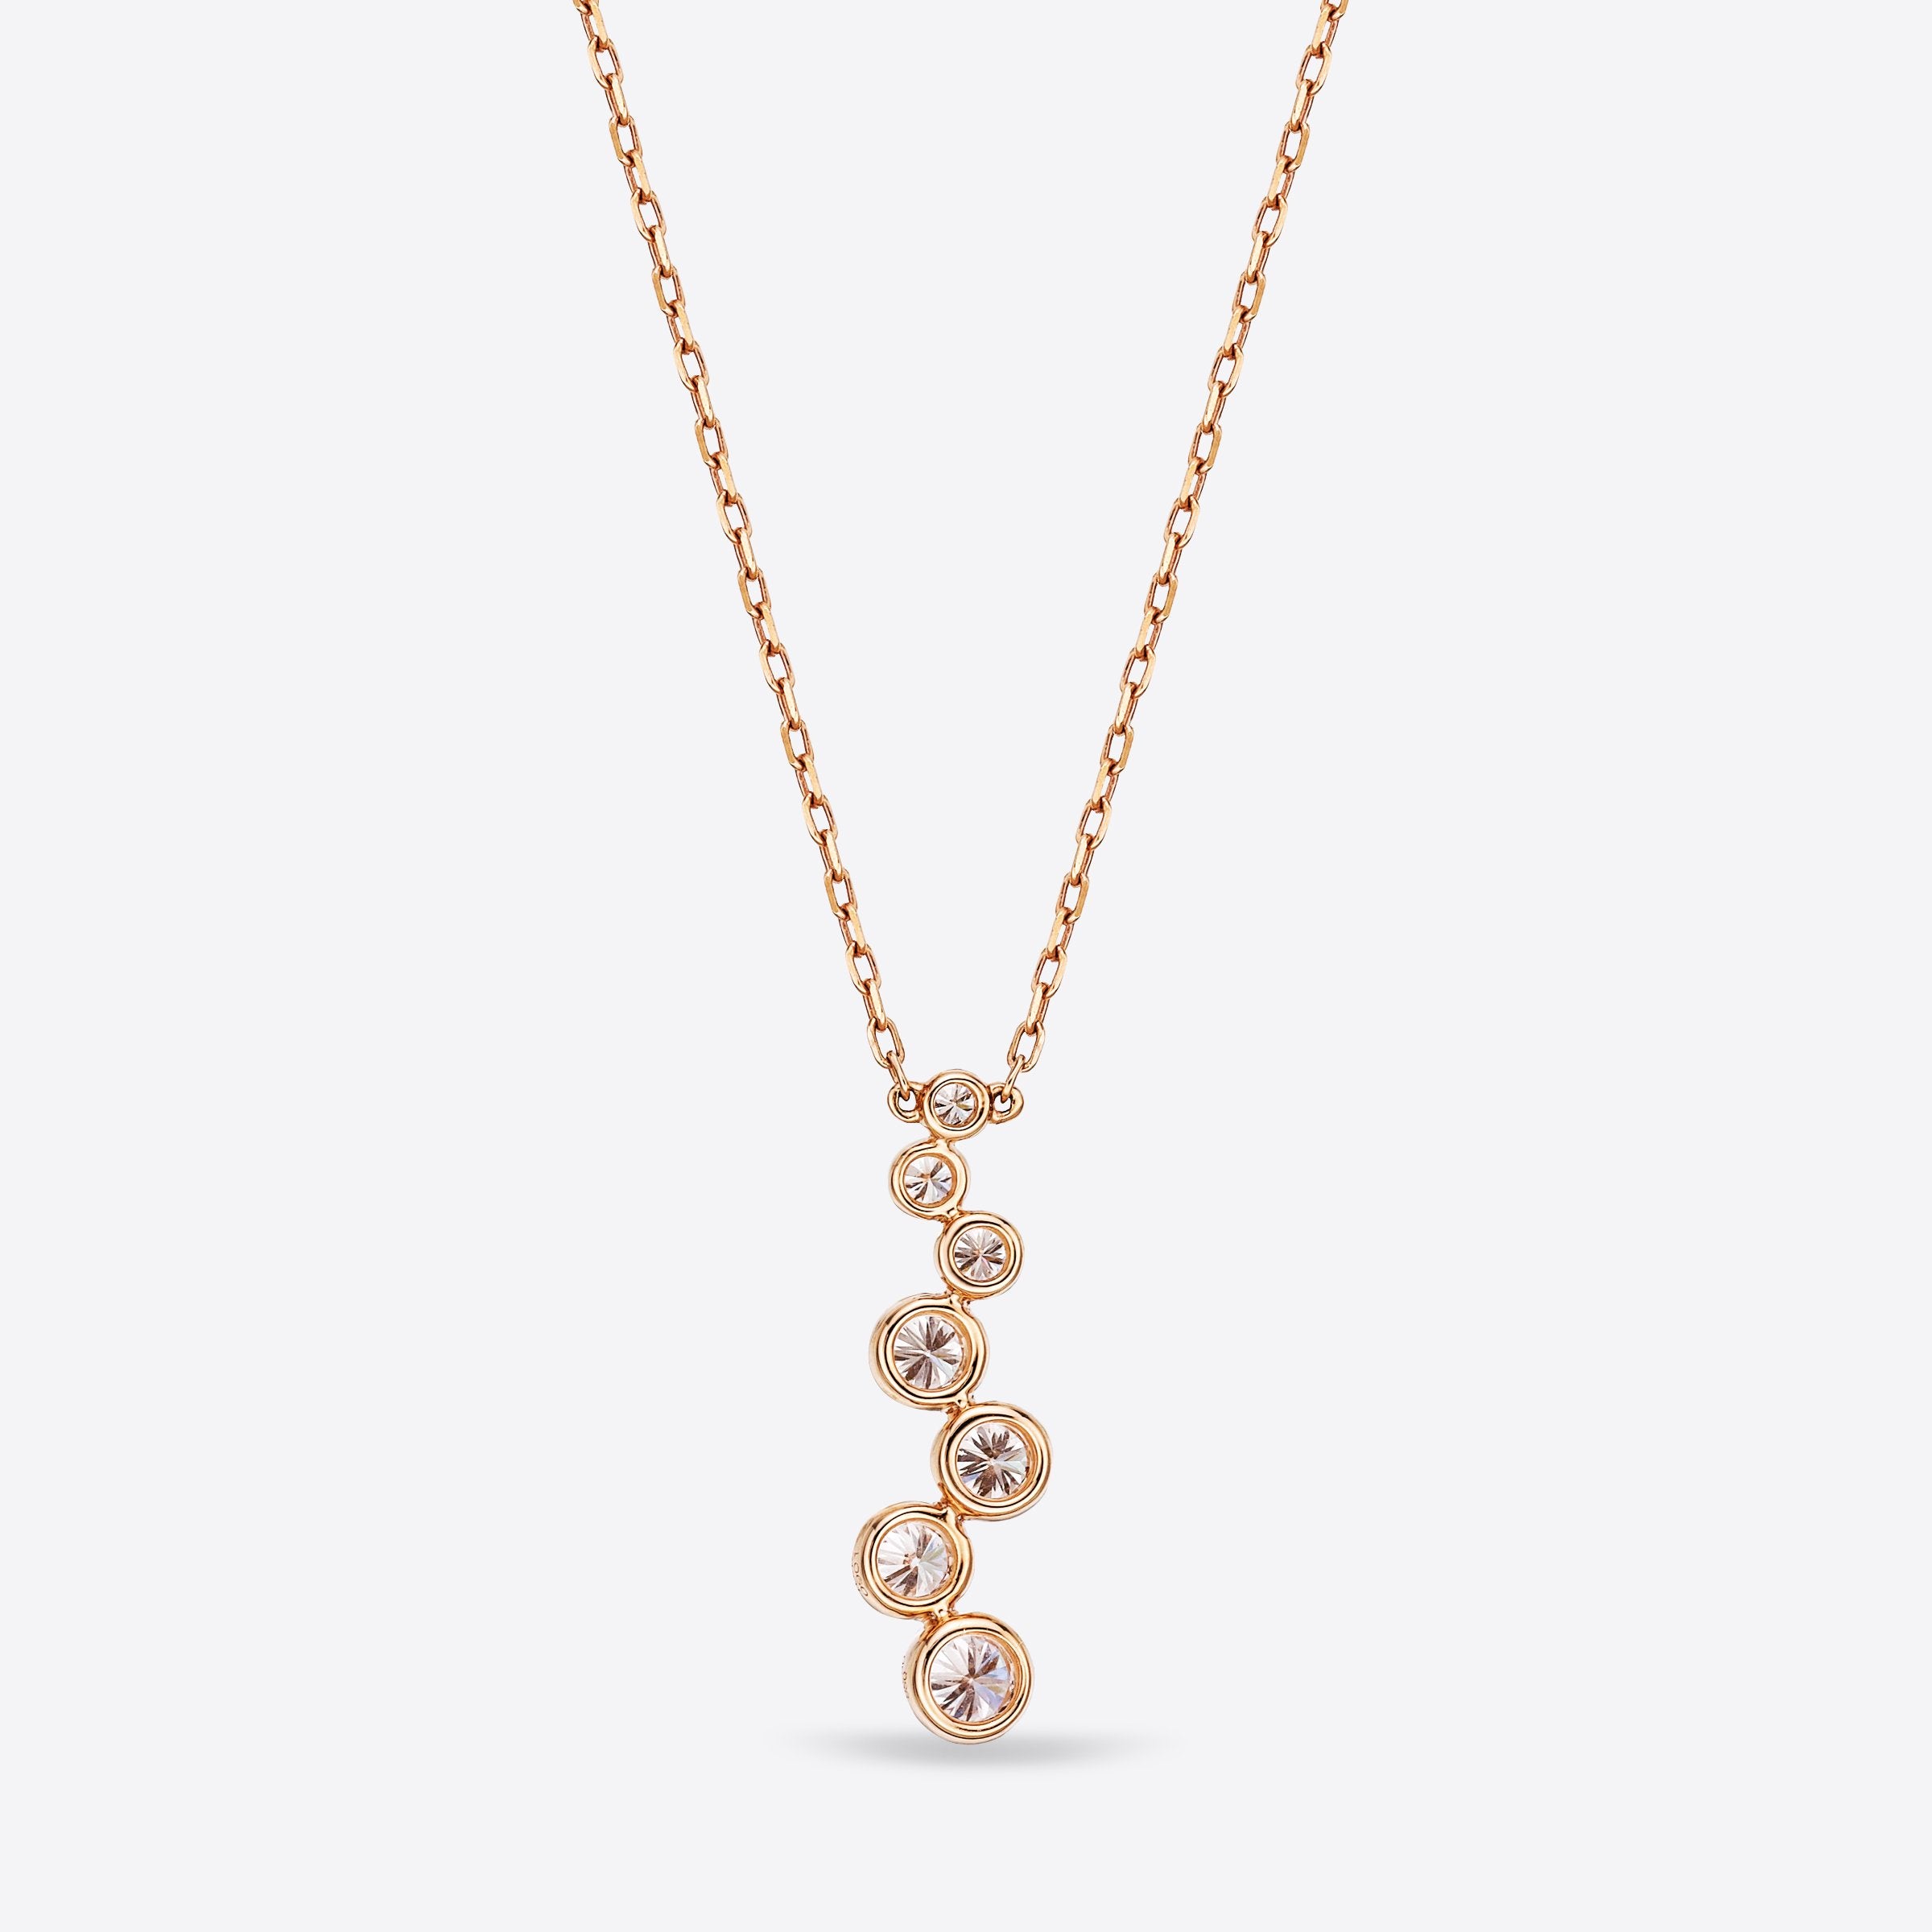 14k Rose Gold and Diamond Breast Cancer Ribbon Necklace - Kat's